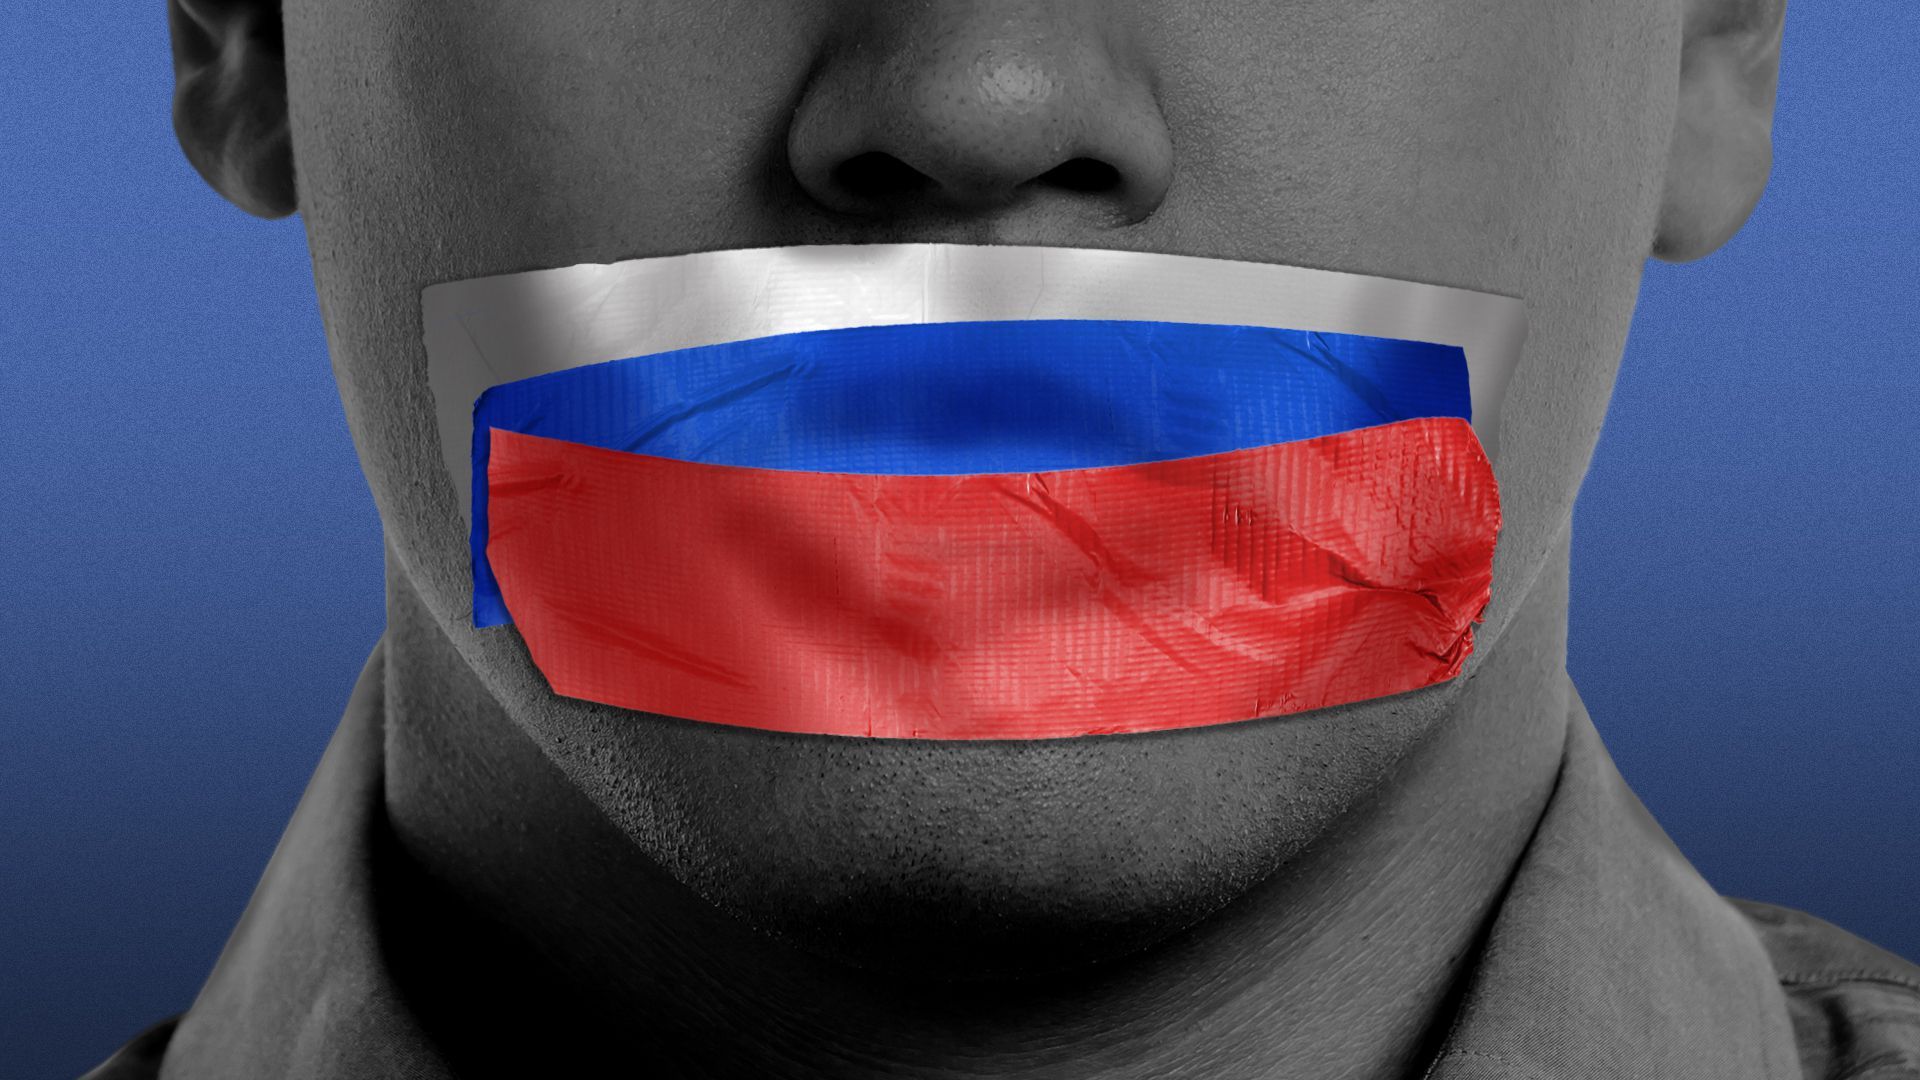 Illustration of a person with their mouth taped with duct tape in the colors of Russia's flag.